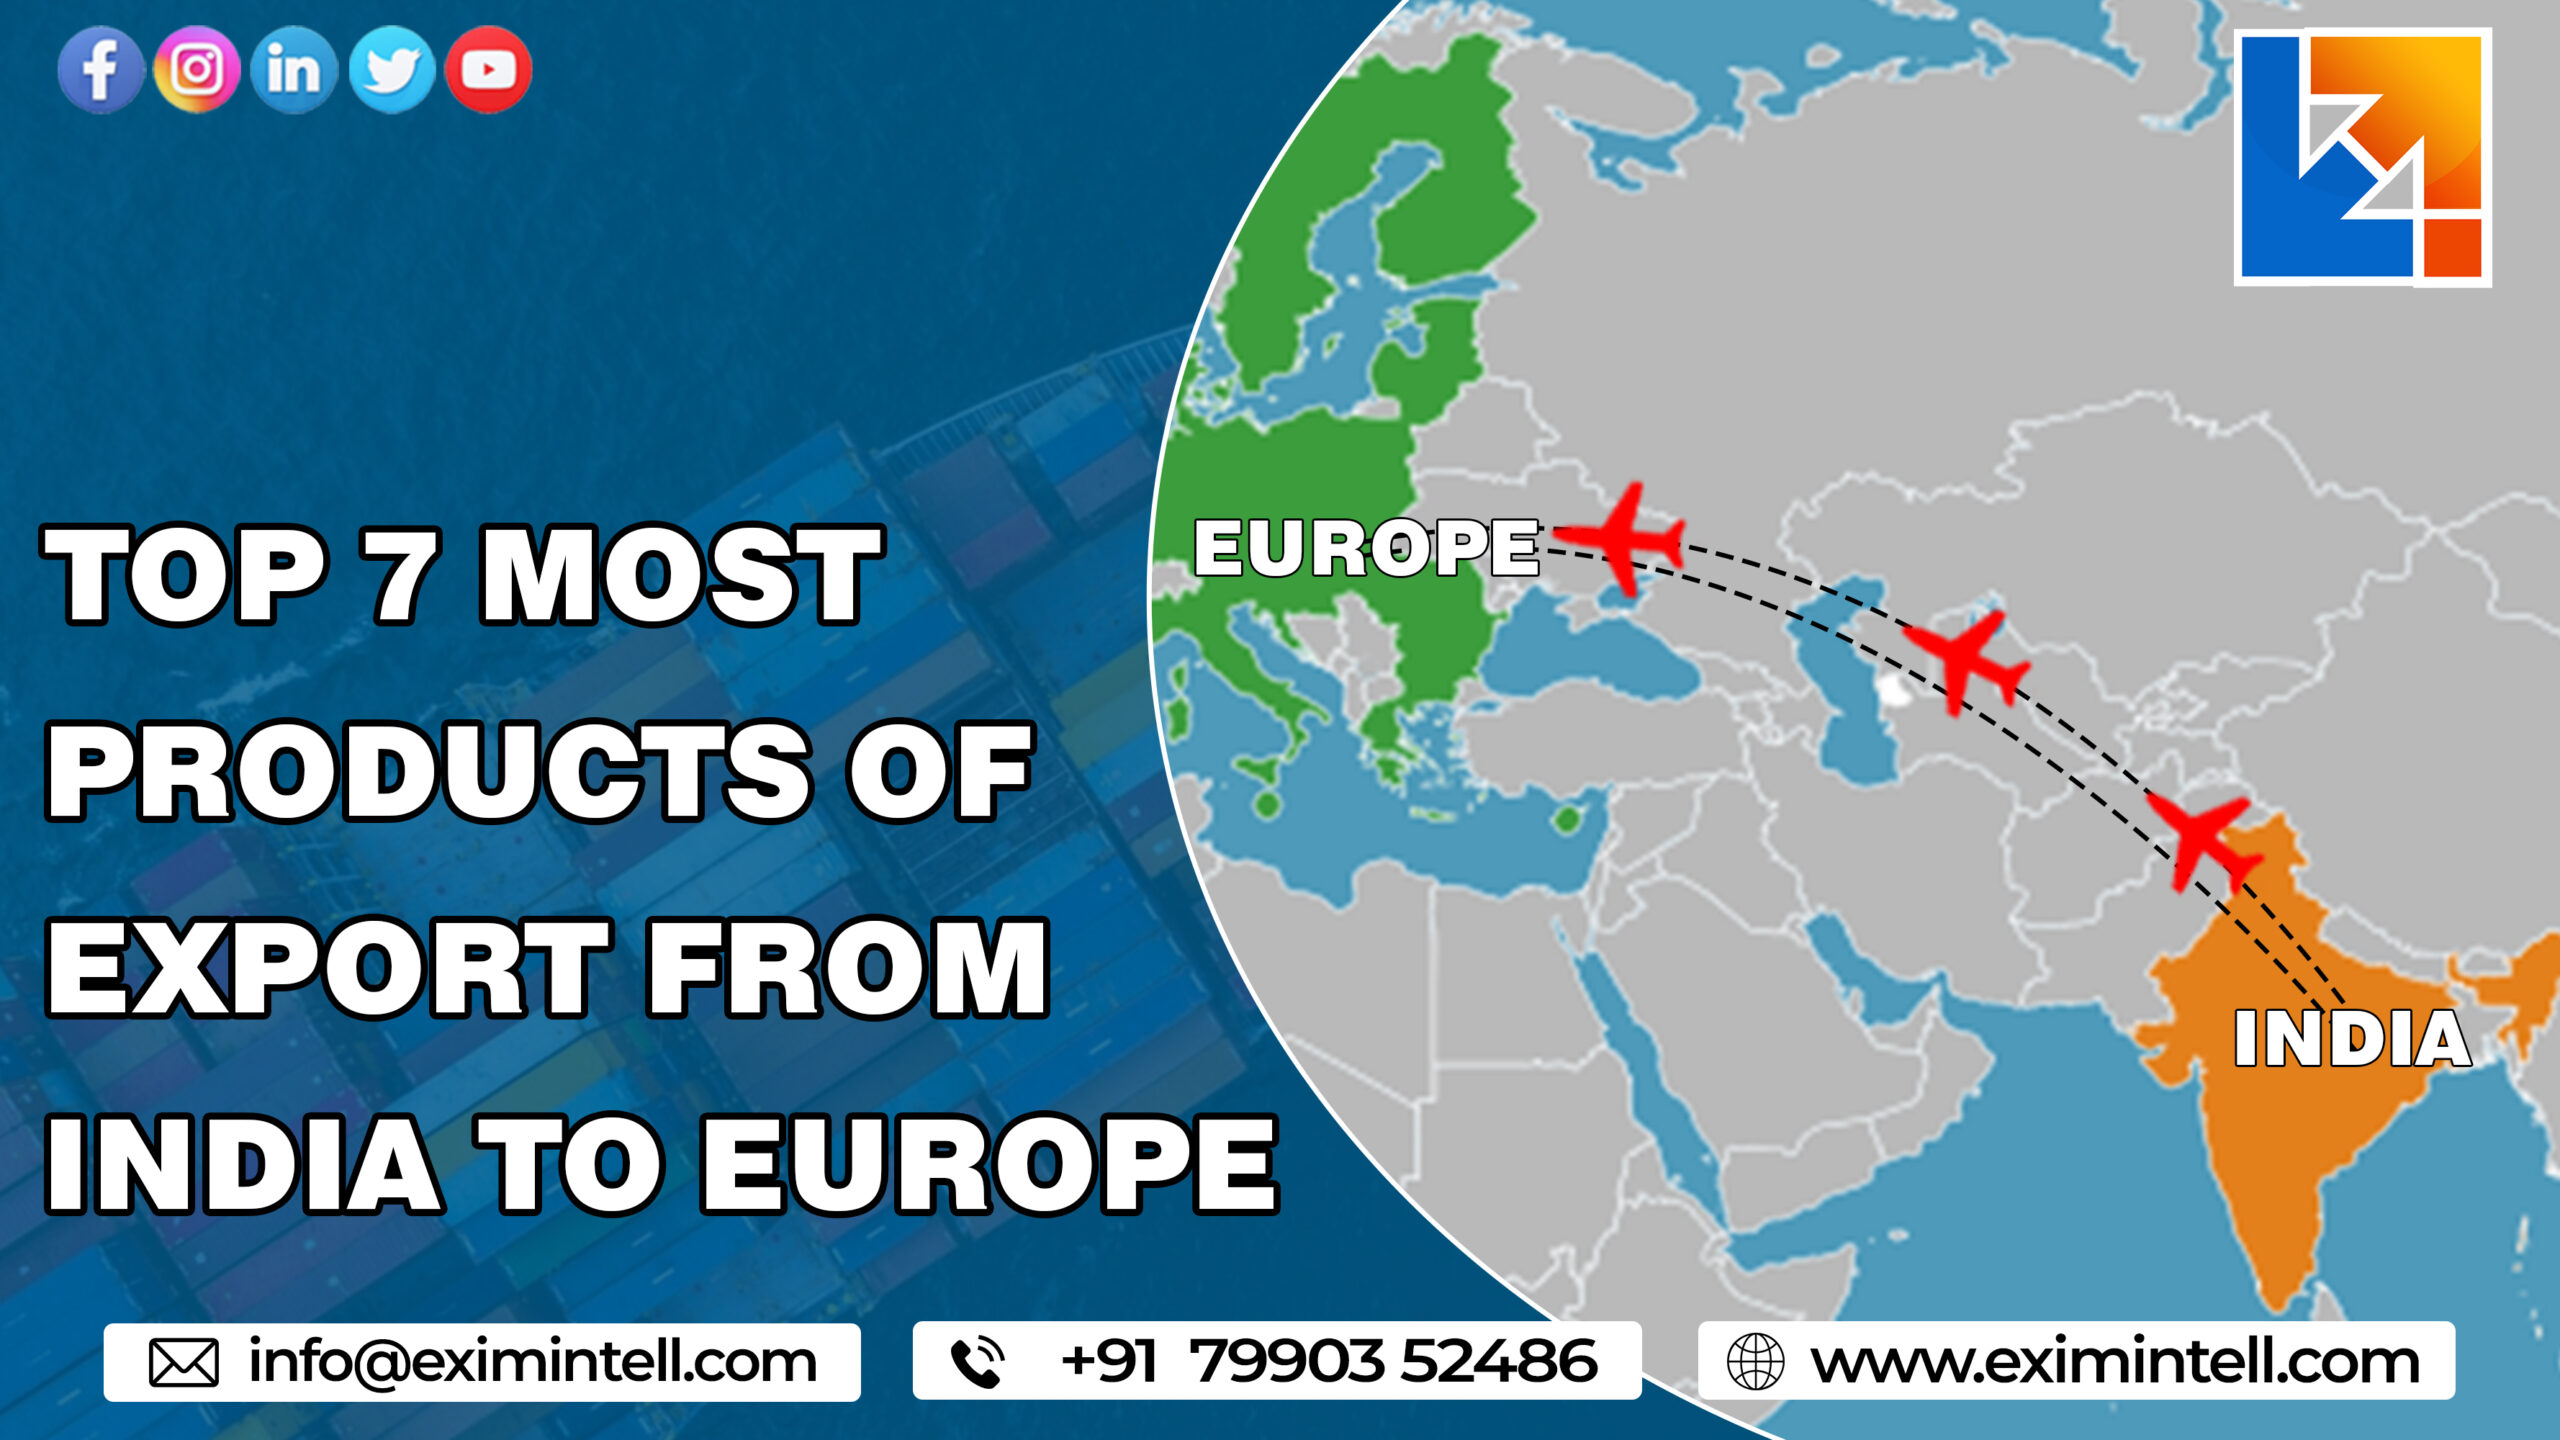 Top 7 most products of export from India to Europe